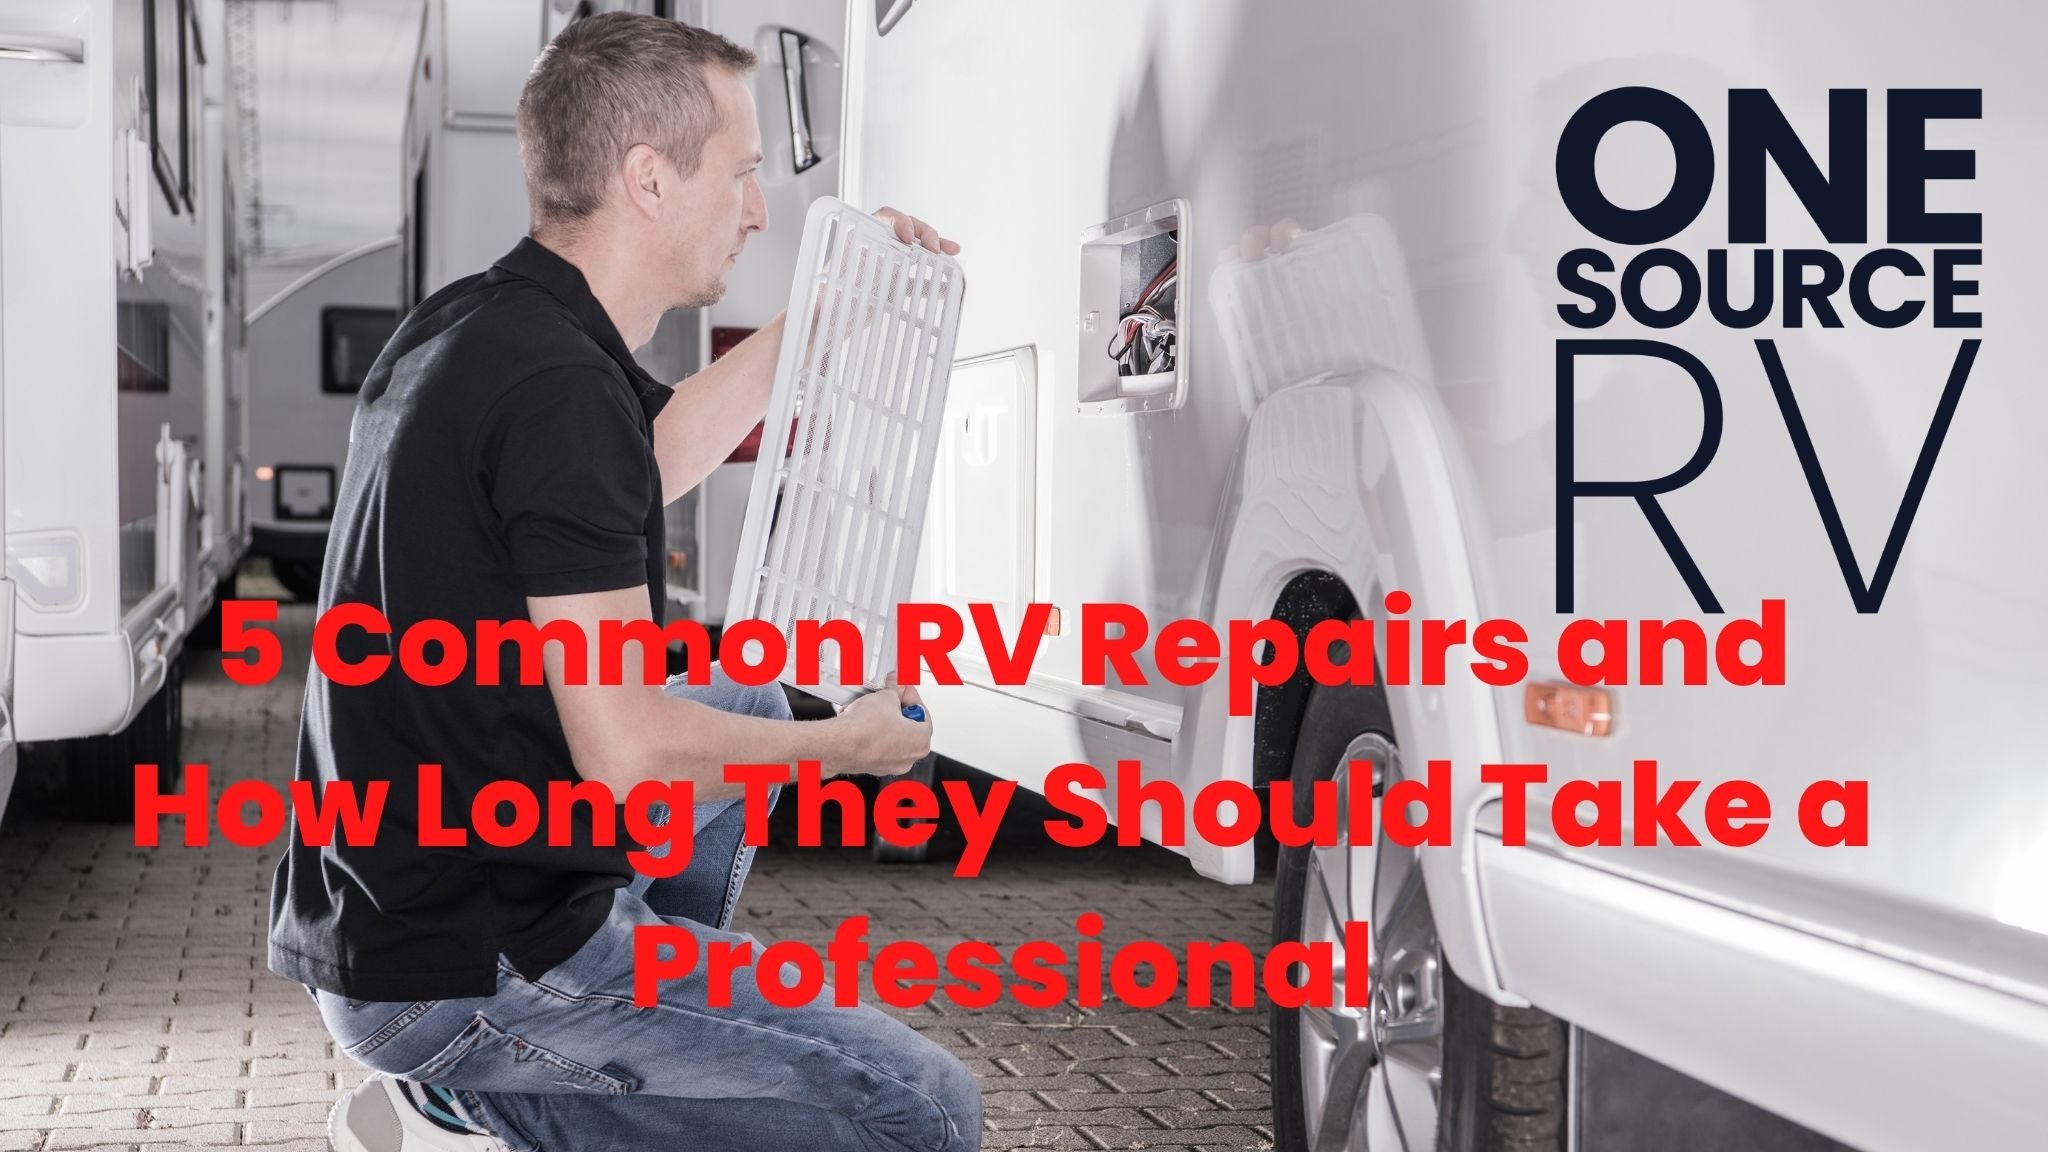 5 Common RV Repairs and How Long They Should Take a Professional